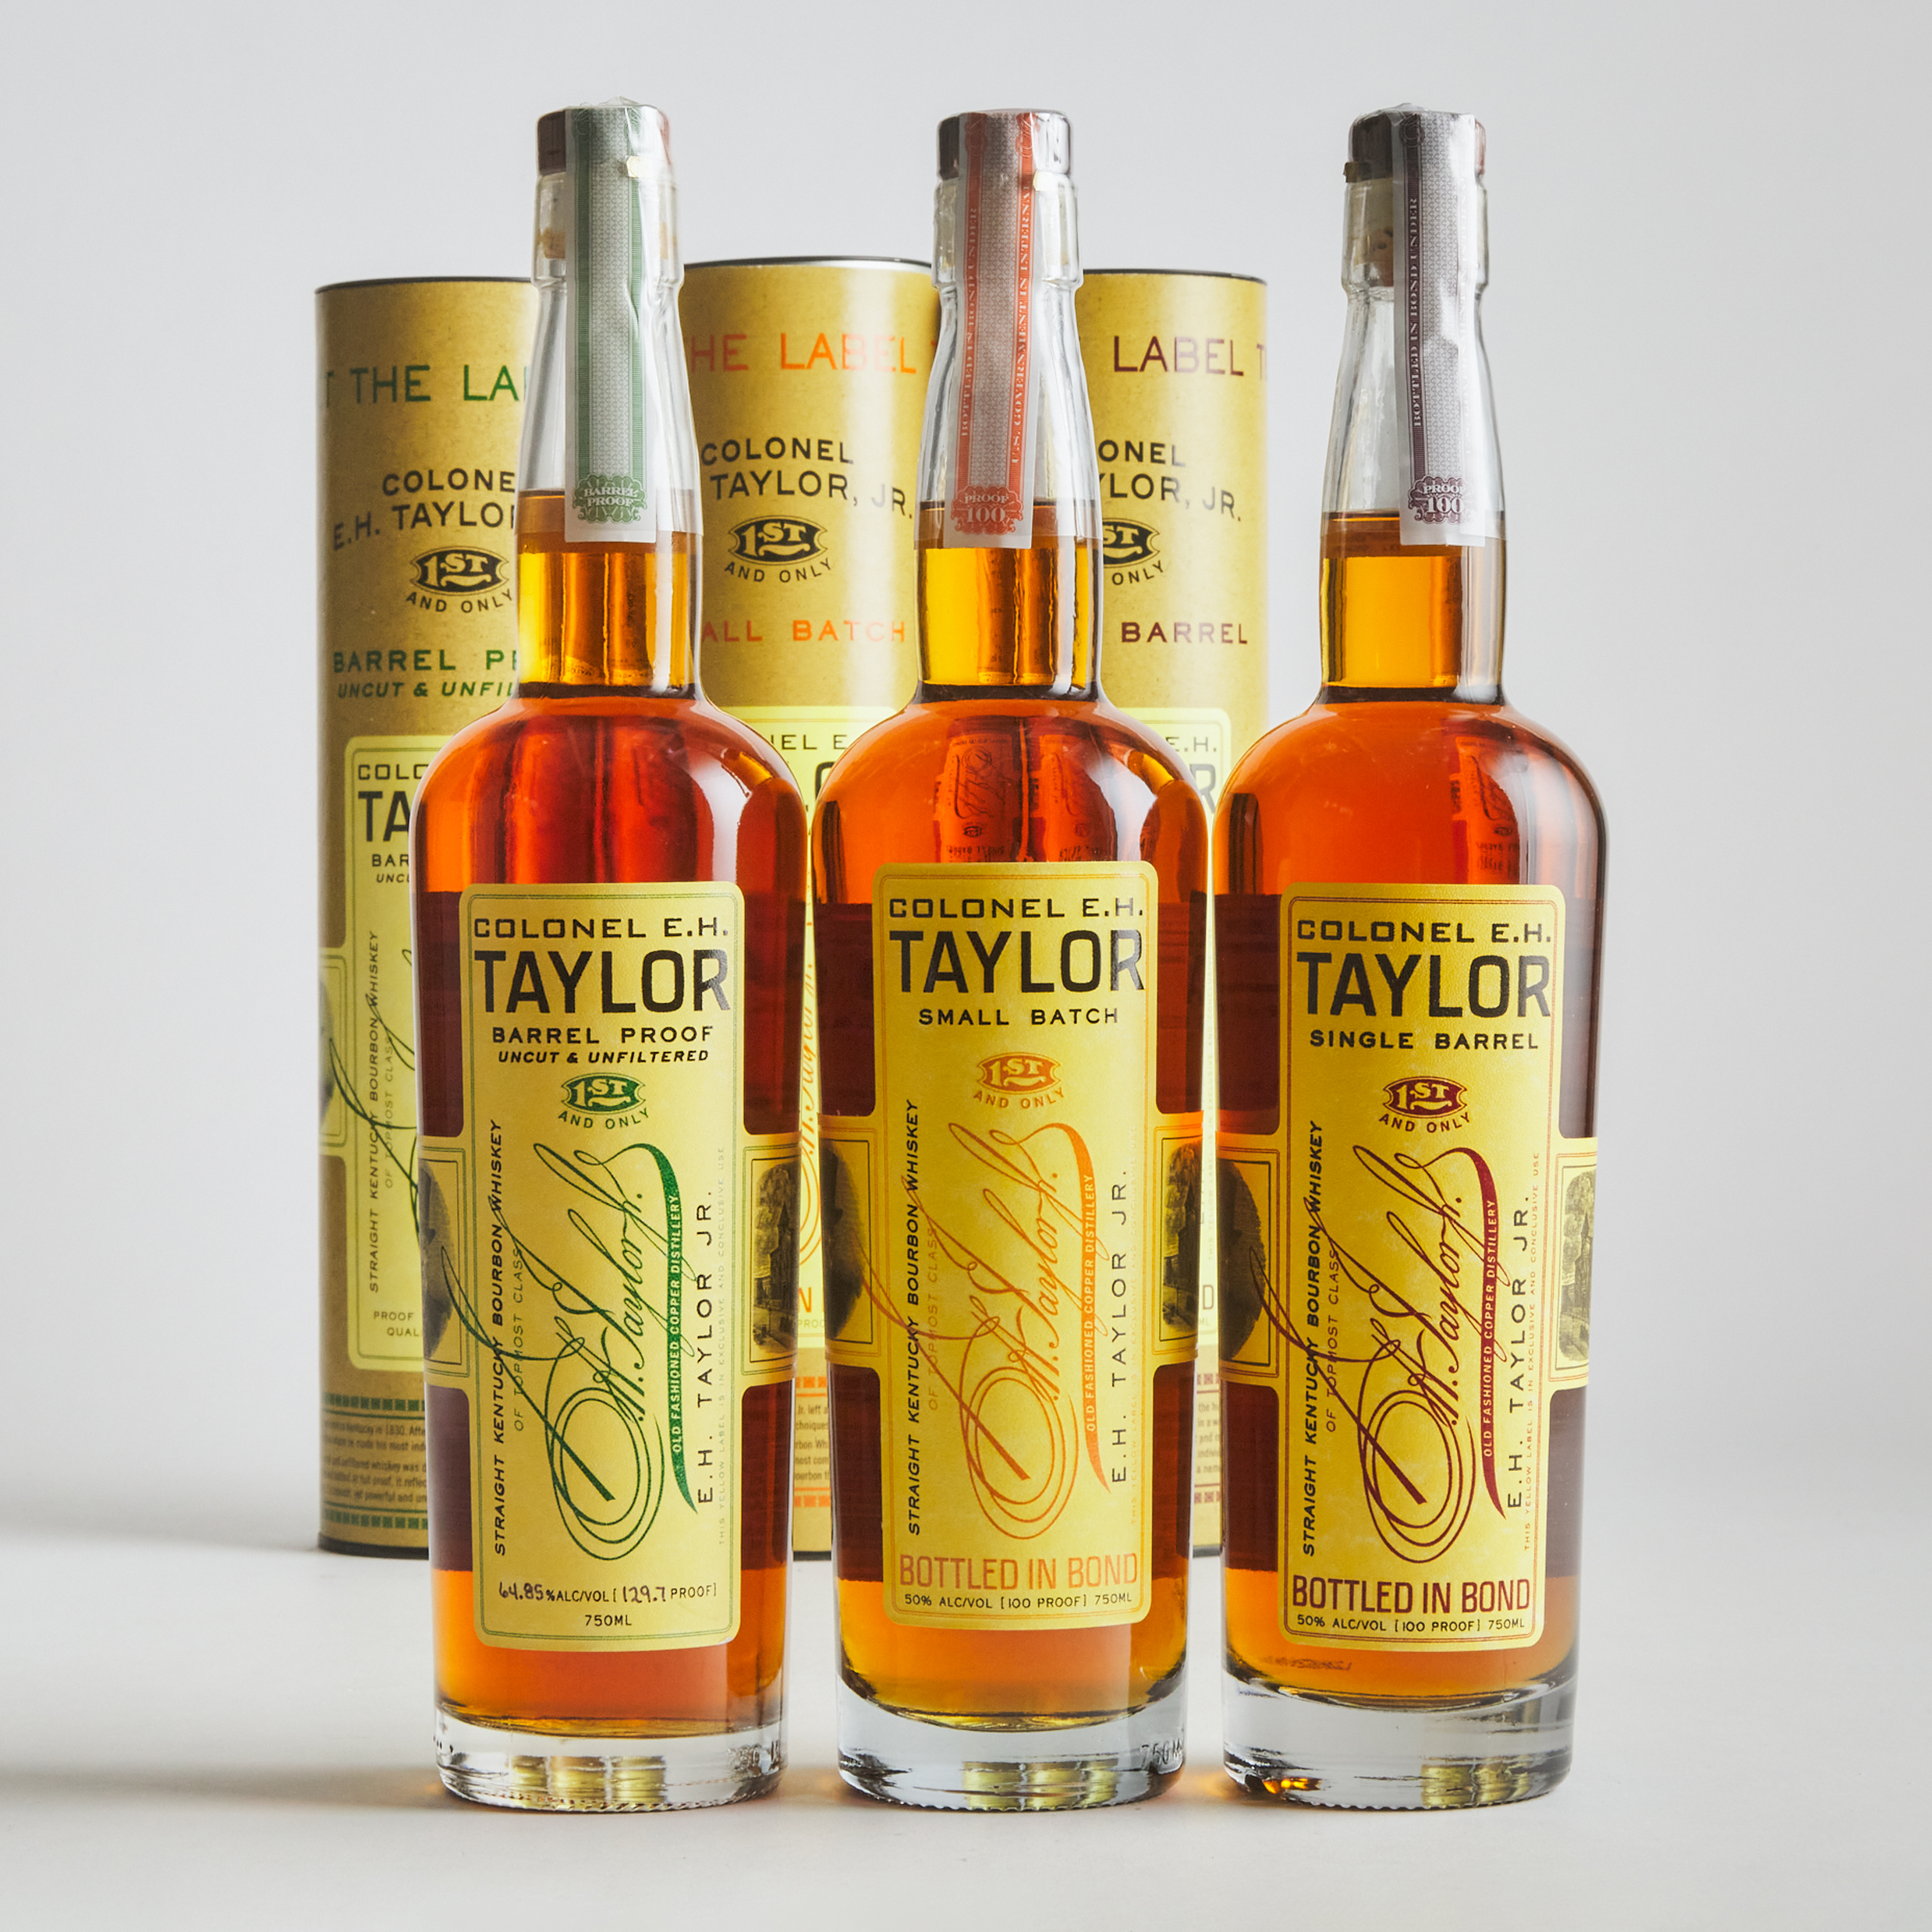 COLONEL E.H. TAYLOR JR. BARREL PROOF STRAIGHT KENTUCKY BOURBON WHISKEY (ONE 750 ML)
COLONEL E.H. TAYLOR JR. SINGLE BARREL STRAIGHT KENTUCKY BOURBON WHISKEY (ONE 750 ML)
COLONEL E.H. TAYLOR JR. SMALL BATCH STRAIGHT KENTUCKY BOURBON WHISKEY (ONE 750 ML)